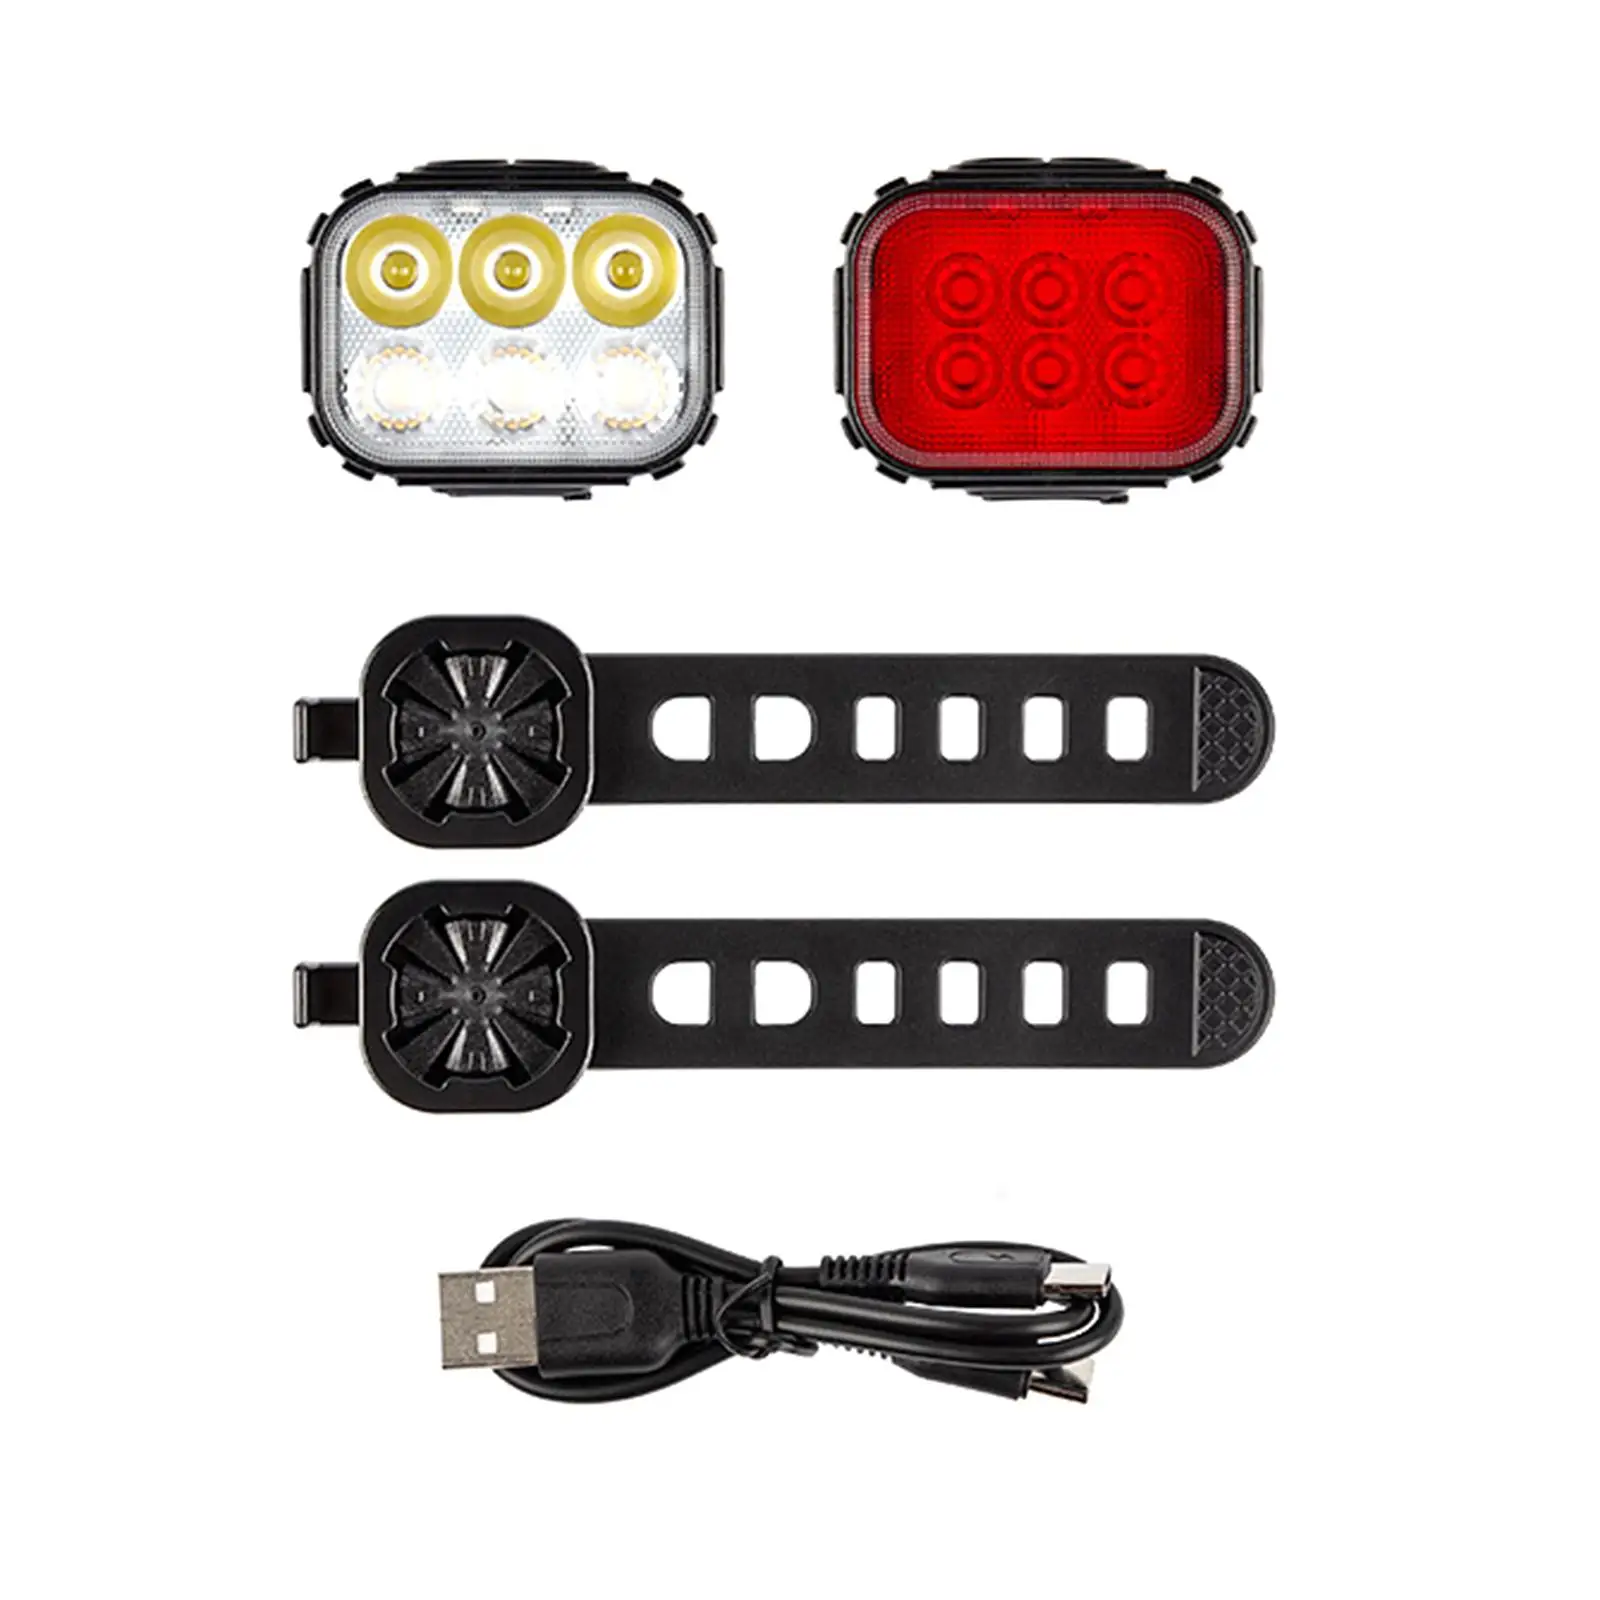 Lights Set Bike Headlight Taillight Front and Tail Light Rechargeable Waterproof Cycling for Mountain Bike LED Lamp